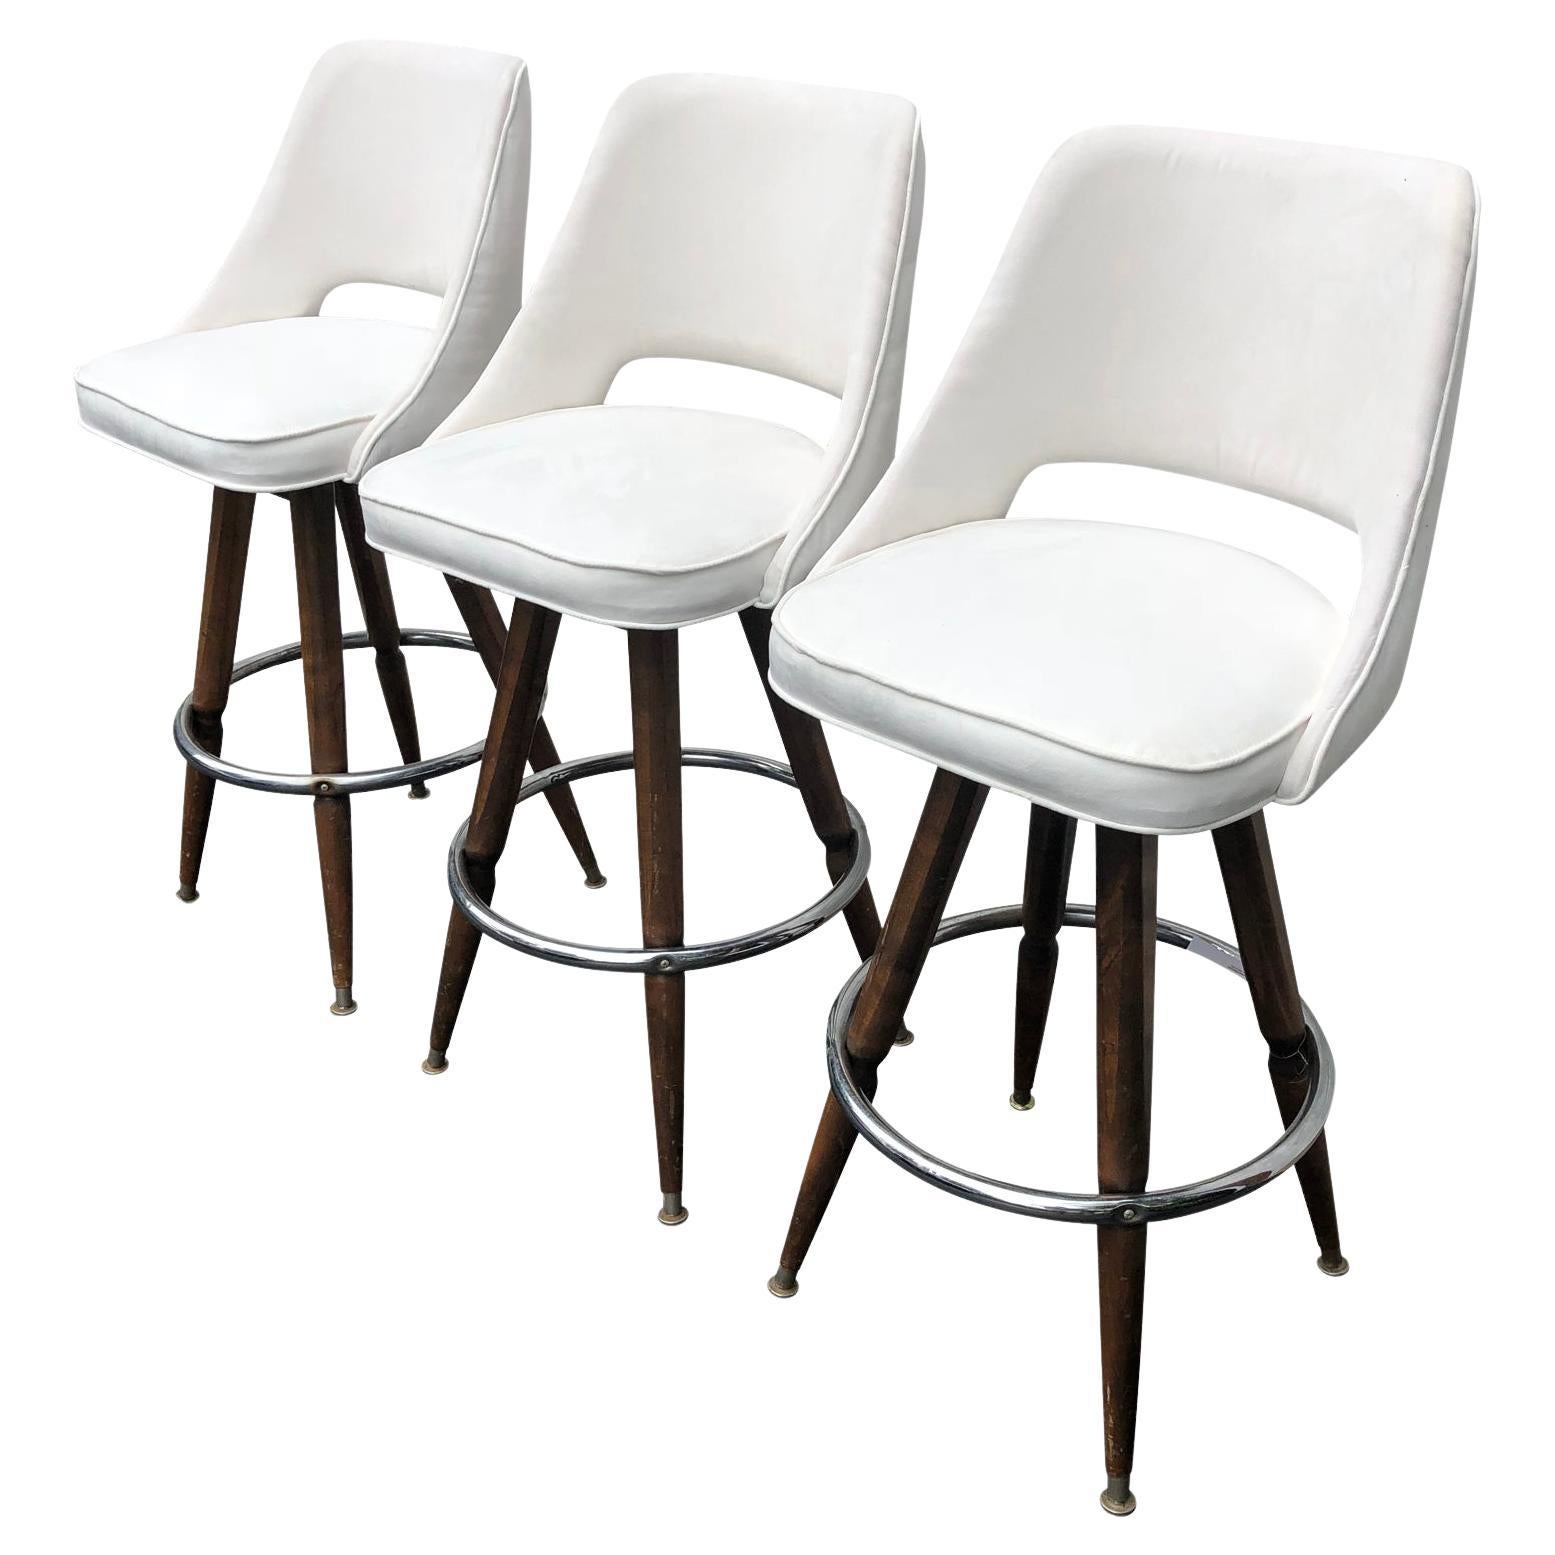 Set of Three Mid-Century White Faux-Suede Bar Stools